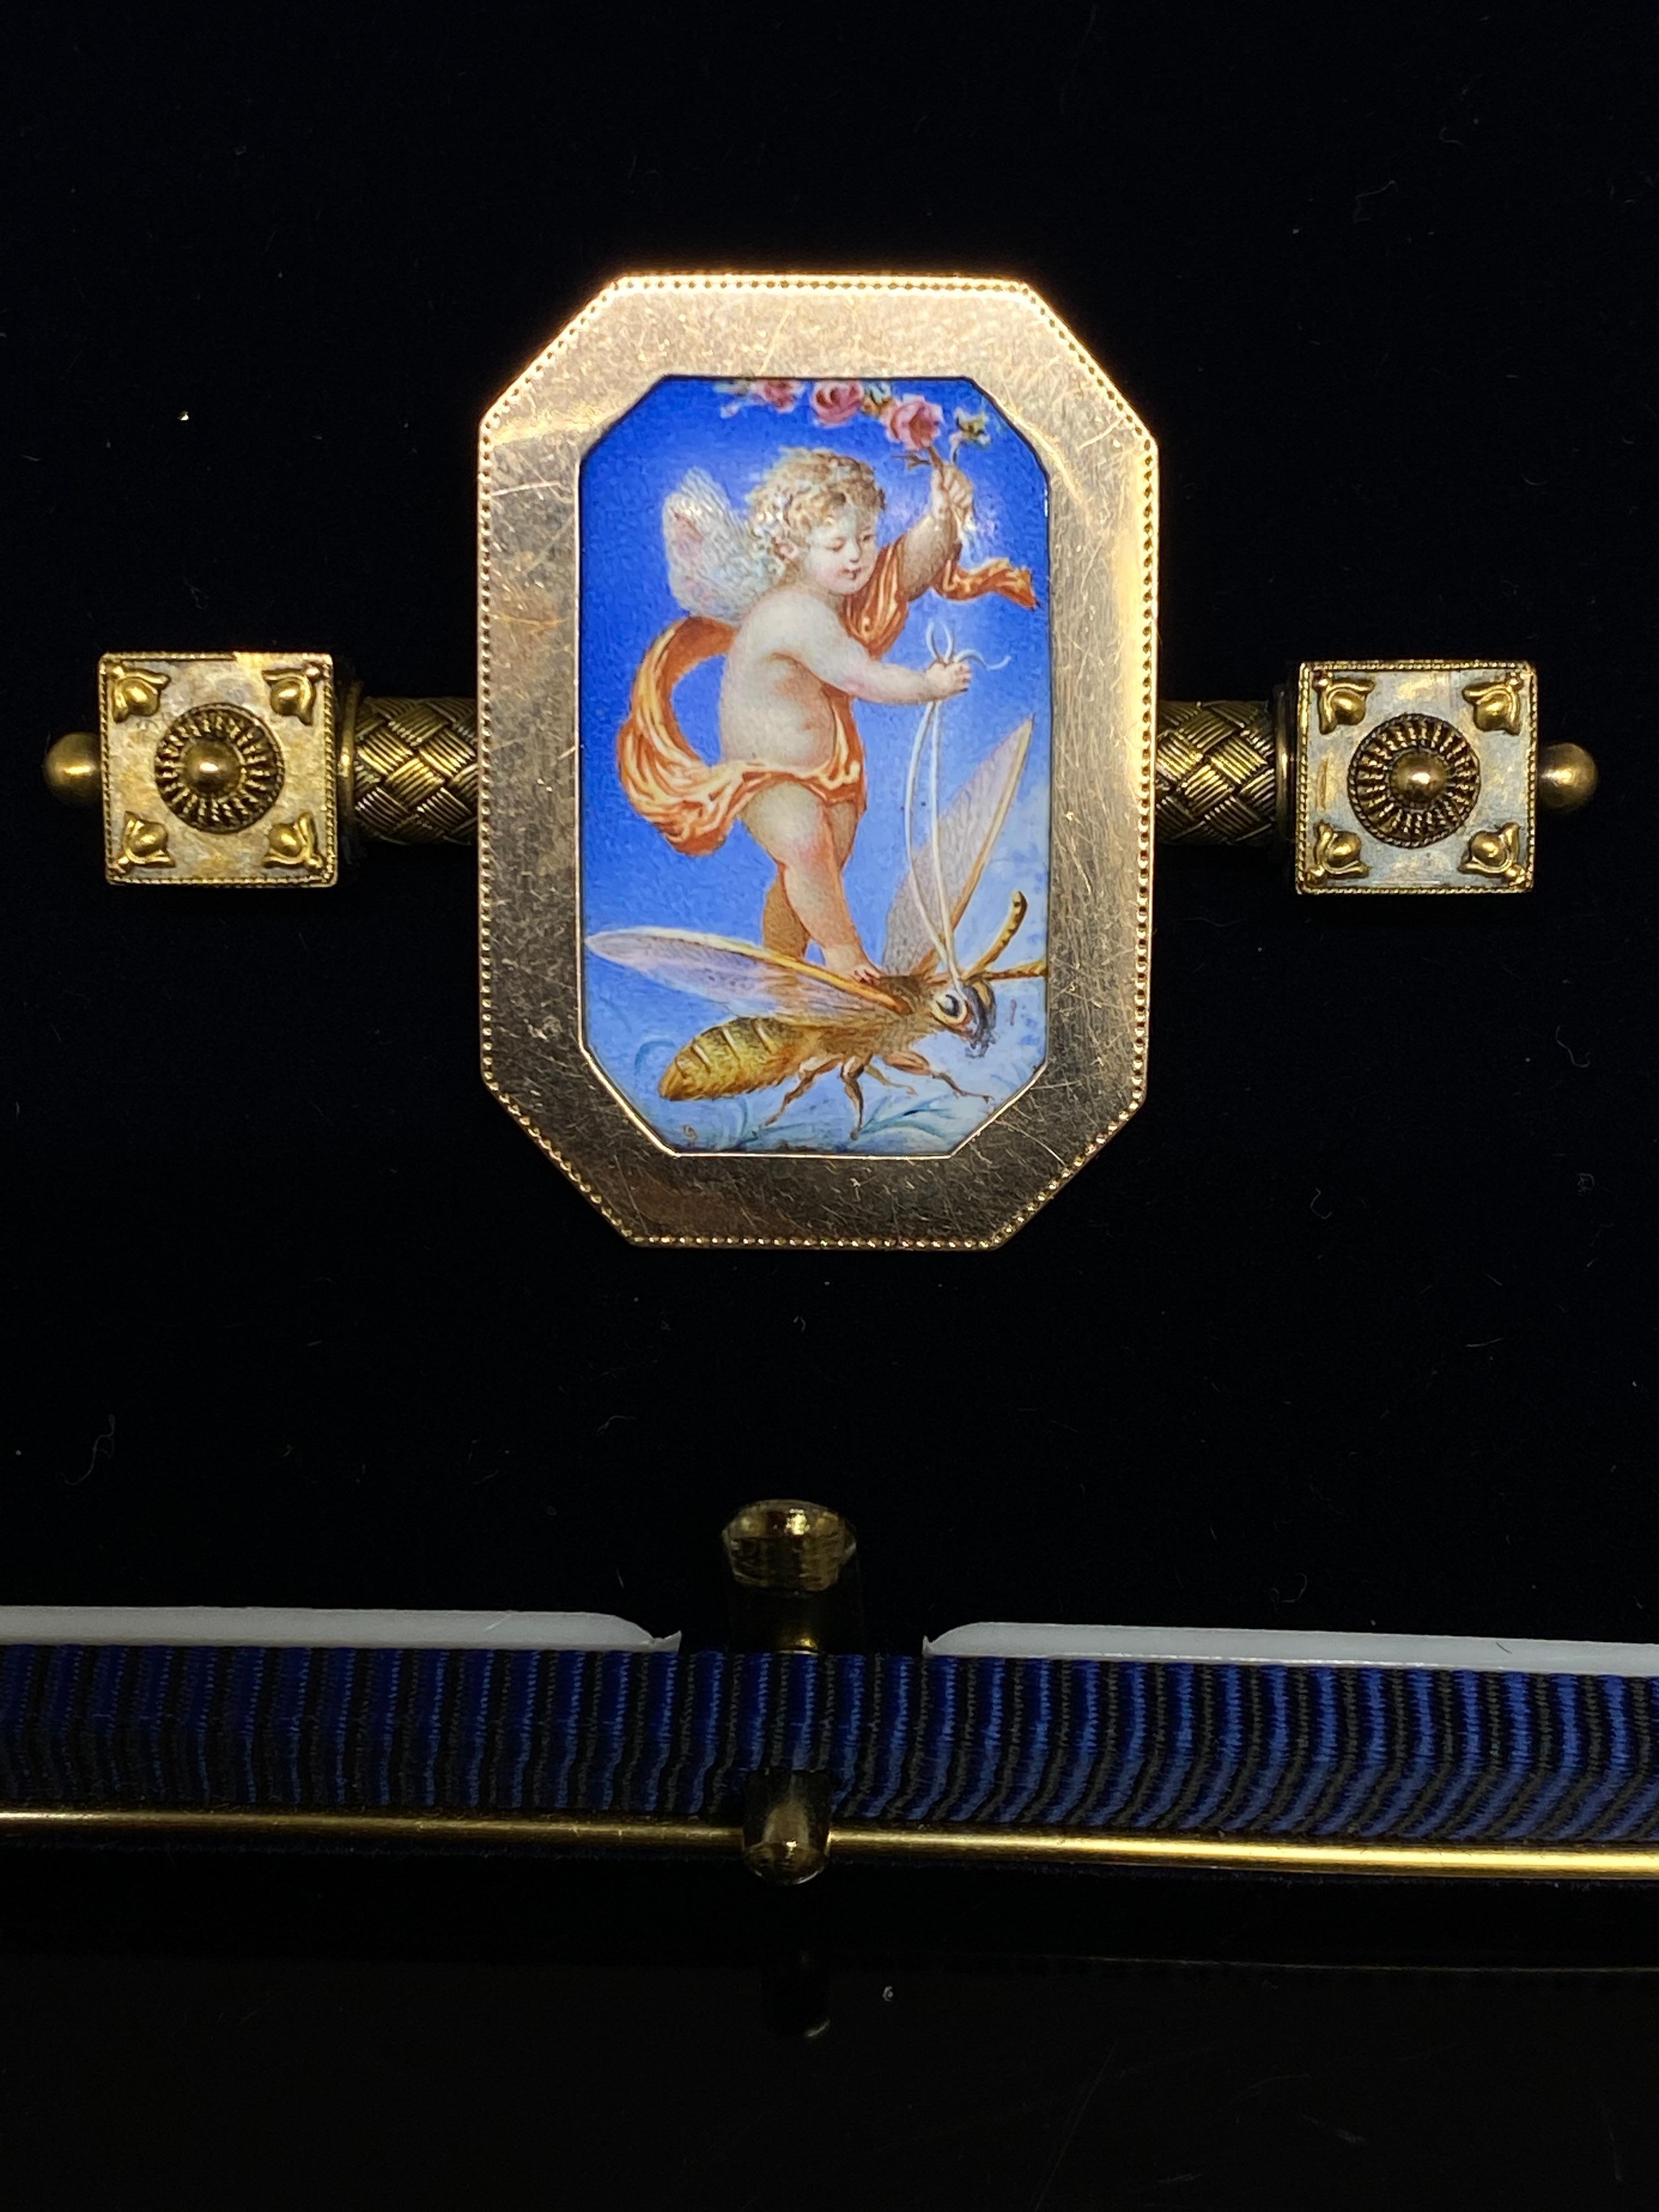 Antique Victorian 14k gold brooch with a stunning hand painted miniature painting on porcelain at the center. An enchanting and delightful little flying cupid, cherub is being drawn atop the wings of a bee.  Absolutely lovely and beautifully